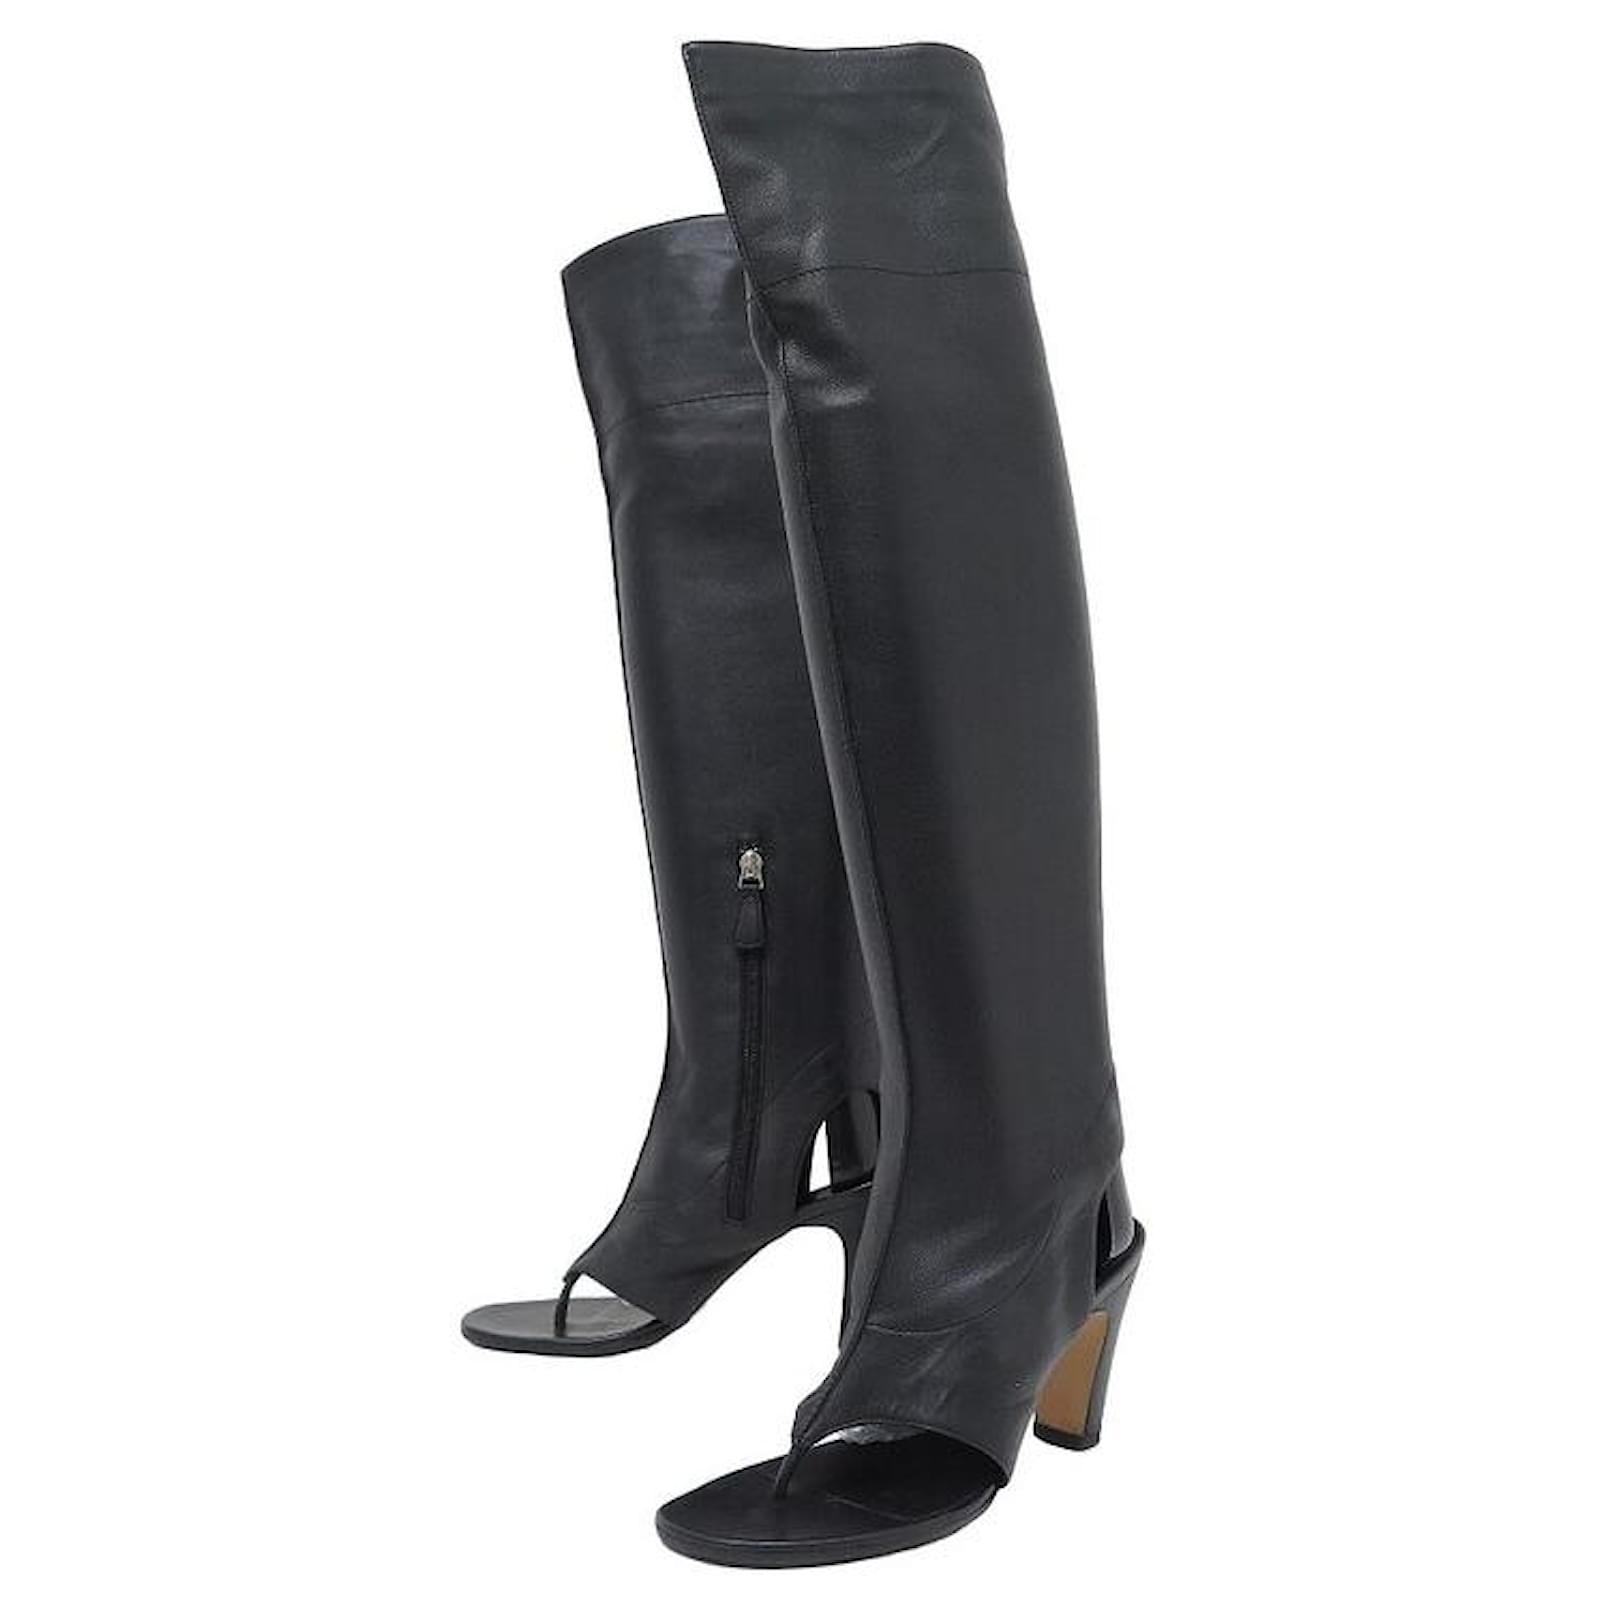 NEW CHANEL LOGO RUNWAY OVER THE KNEE G BOOTS28185 37 LEATHER SHOES BOOTS